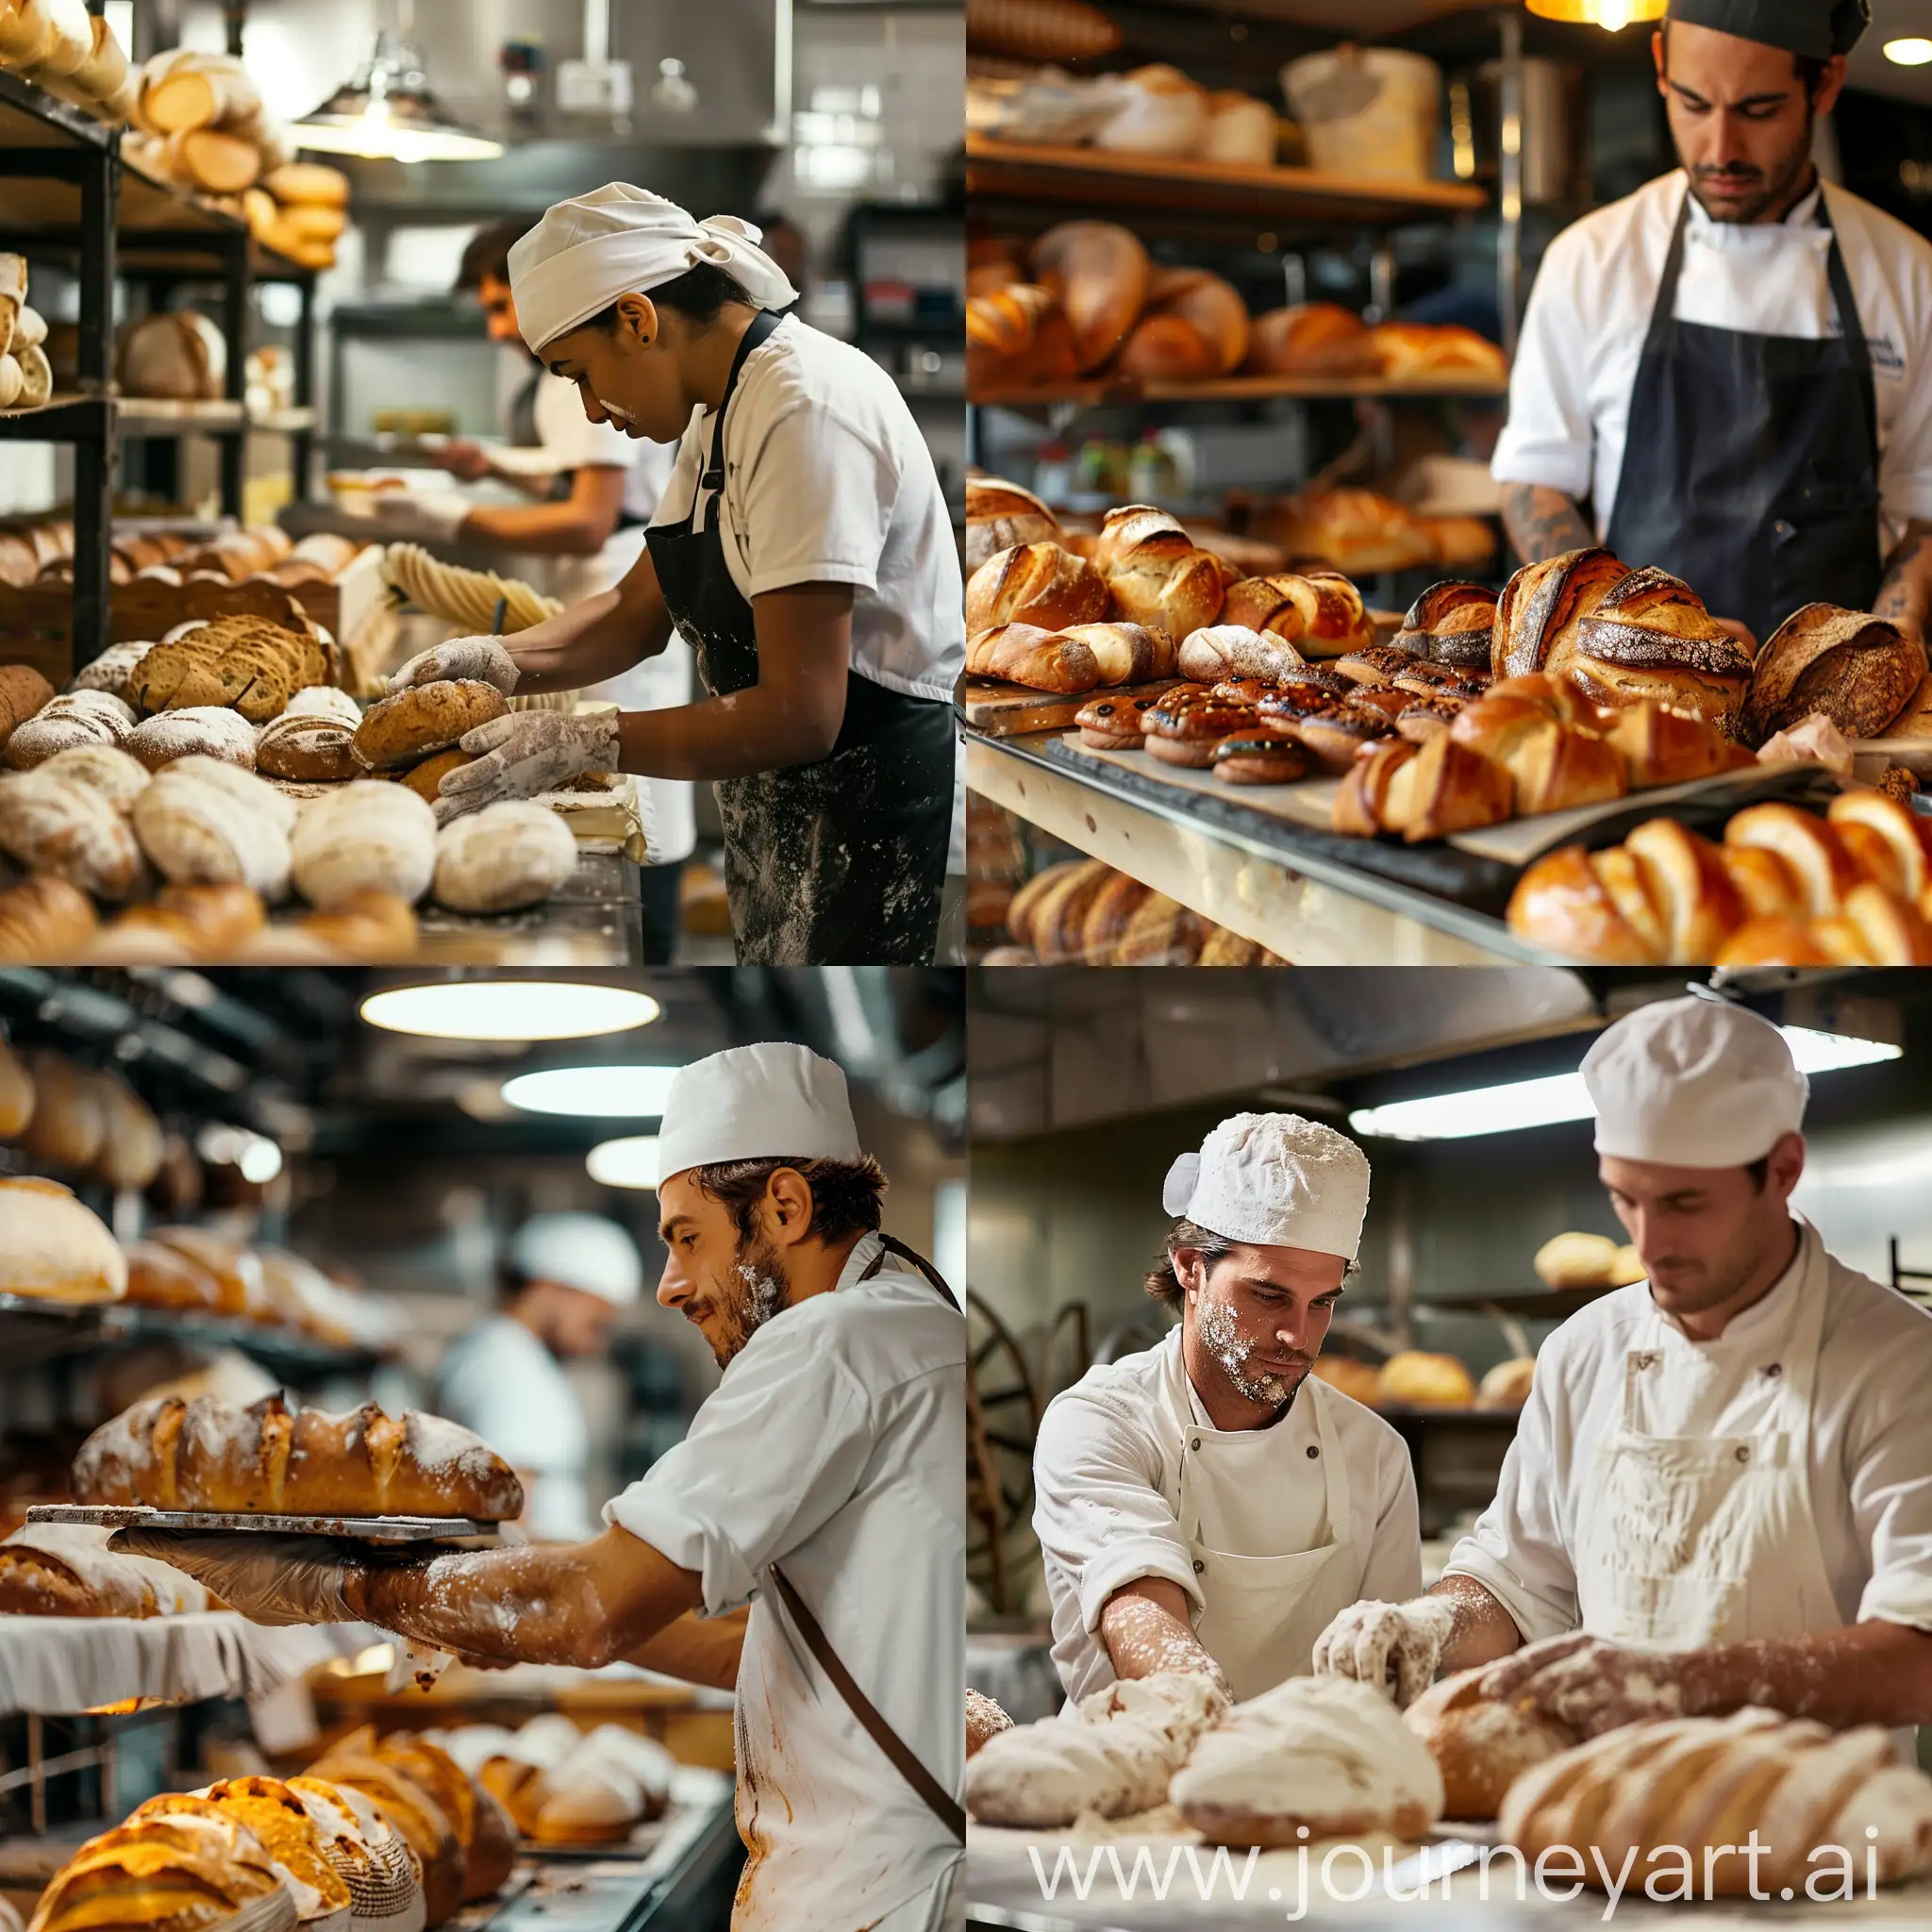 upskill existing workforce with bakers and patissiers, artisans & industrials